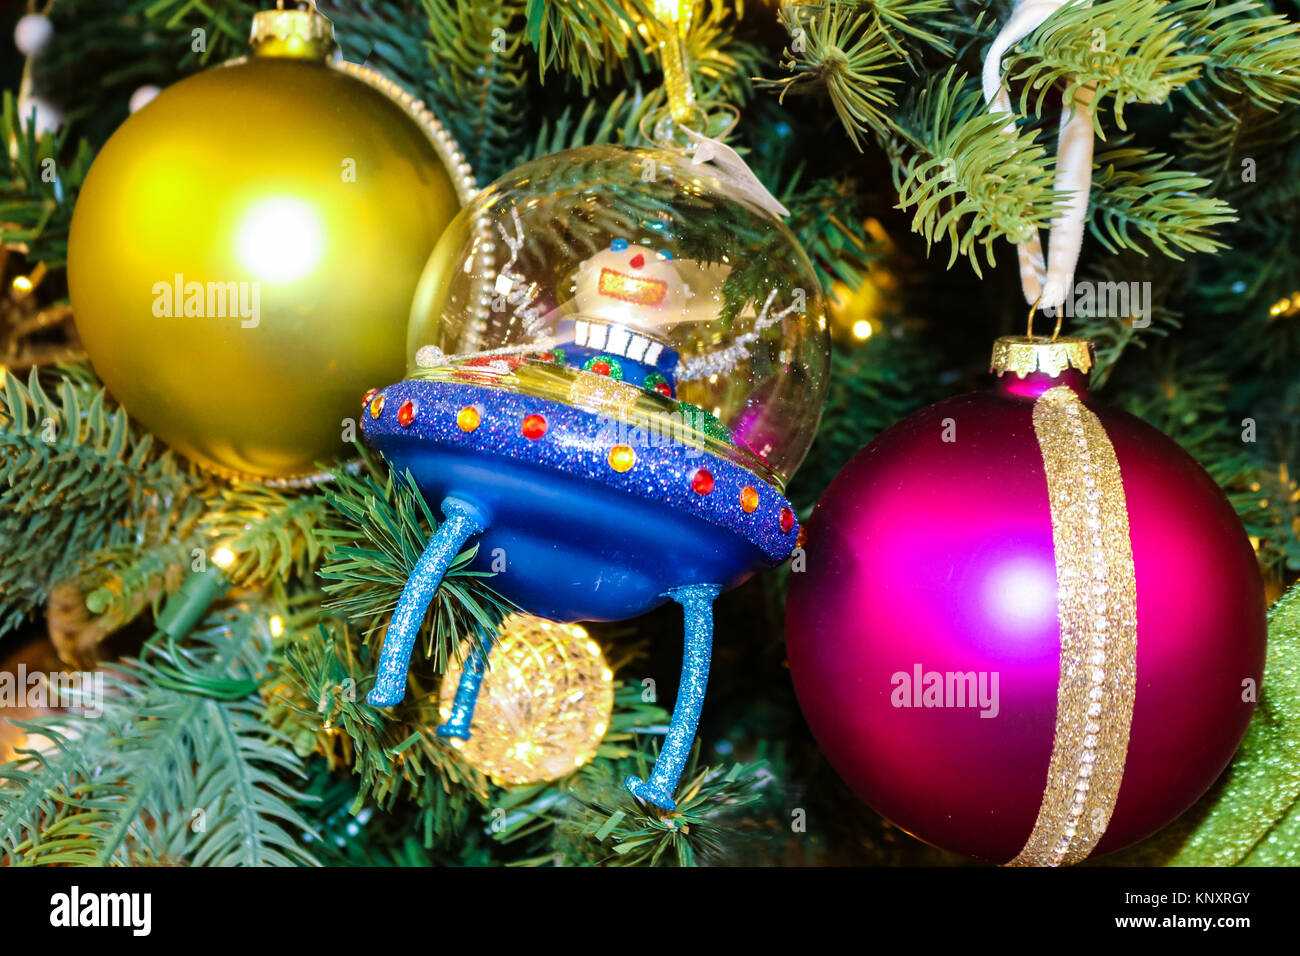 Spaceman giving peace sign in blue alien rocket on traditional Christmas tree with red and magenta ornaments Stock Photo